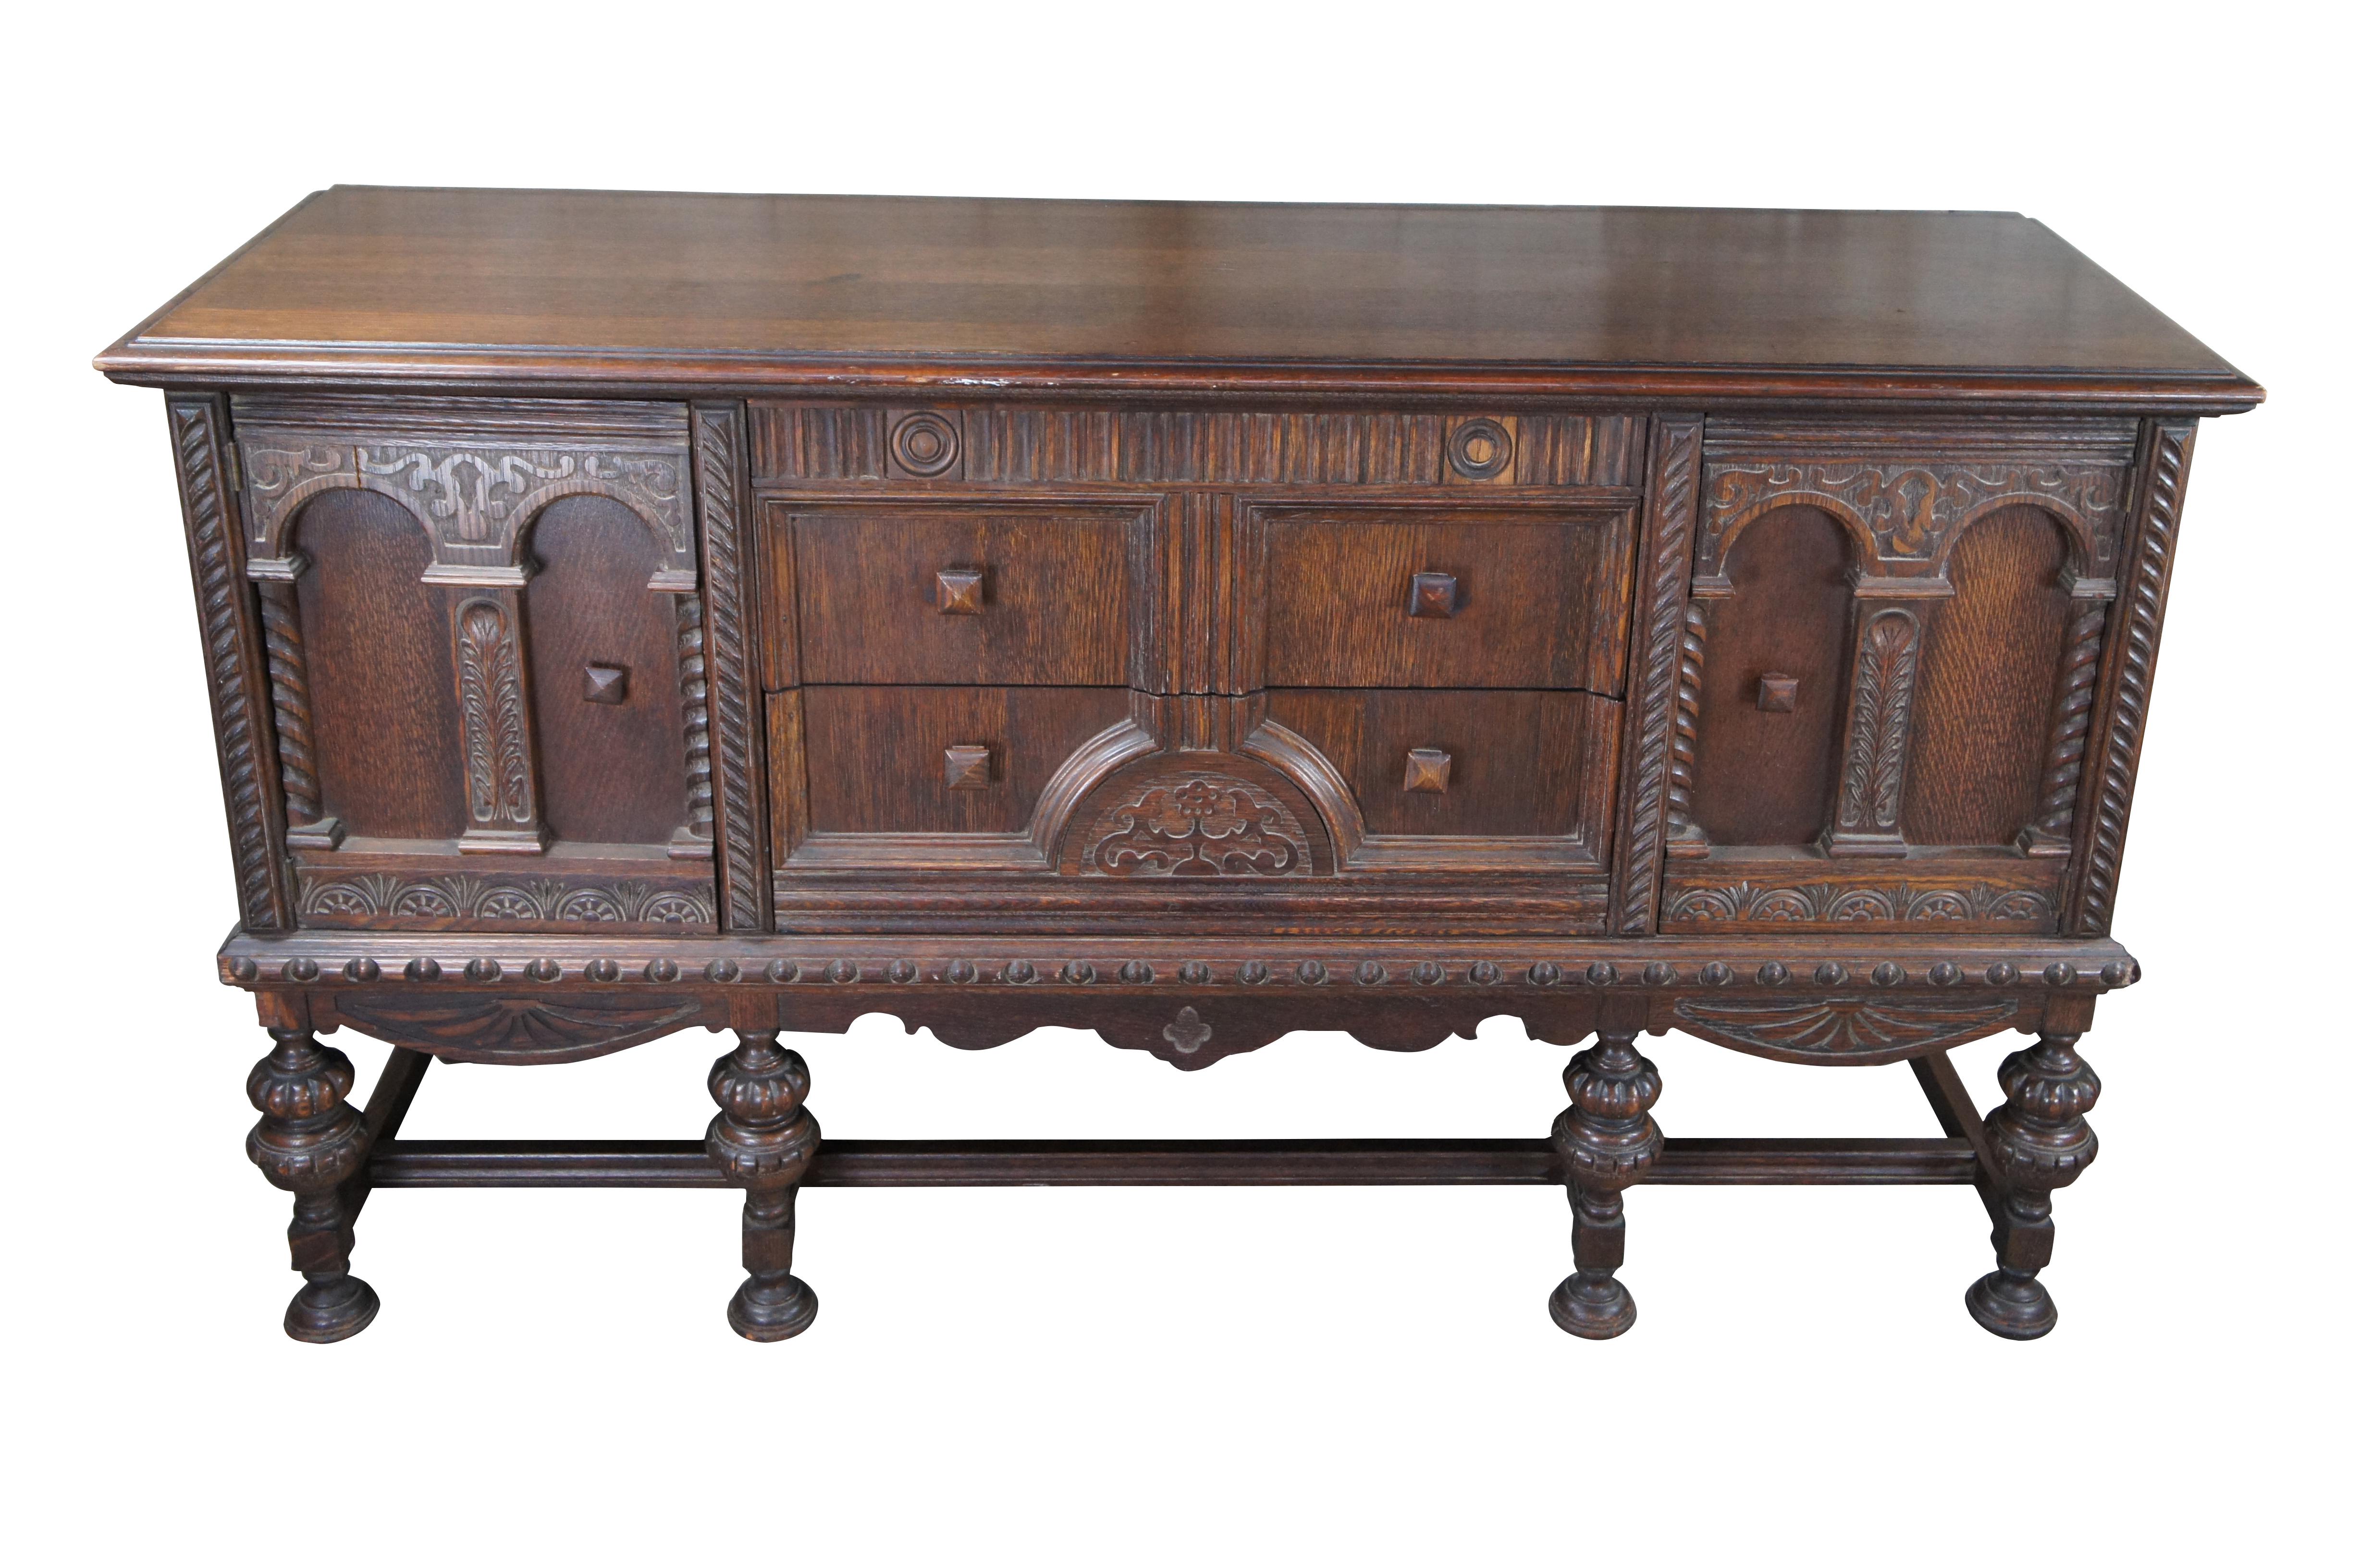 An antique Jacobean style buffet, circa 1930s. Features a rectangular frame carved from oak with three central dovetailed drawers flanked by outer cabinets for accessory storage. Uppermost drawer is concealed / hidden and requires the second drawer